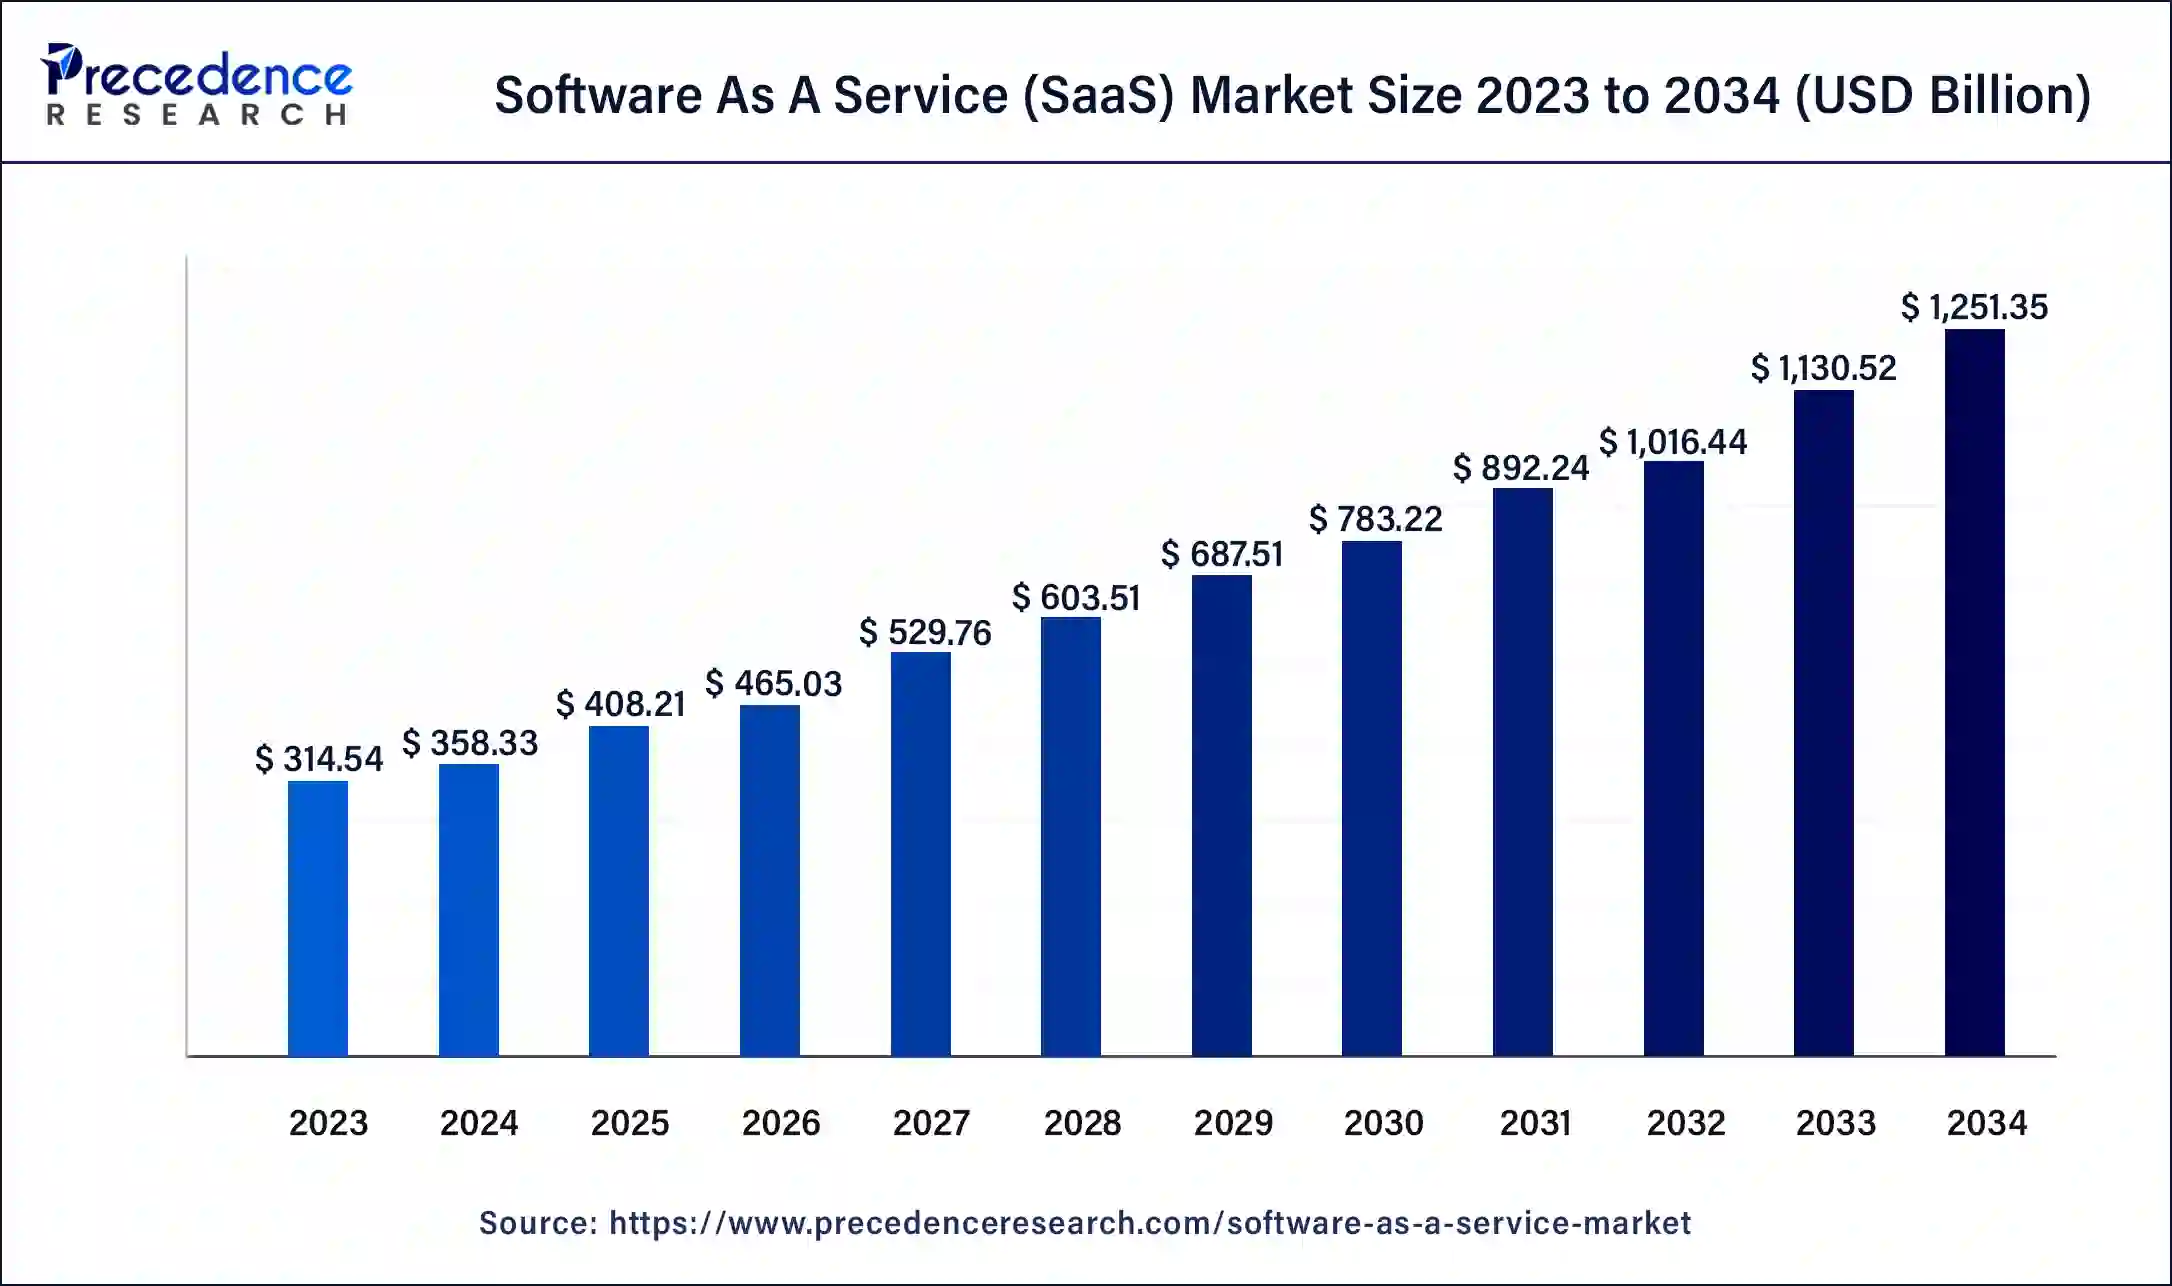 Software as a Service (SaaS) Market Size 2024 to 2034